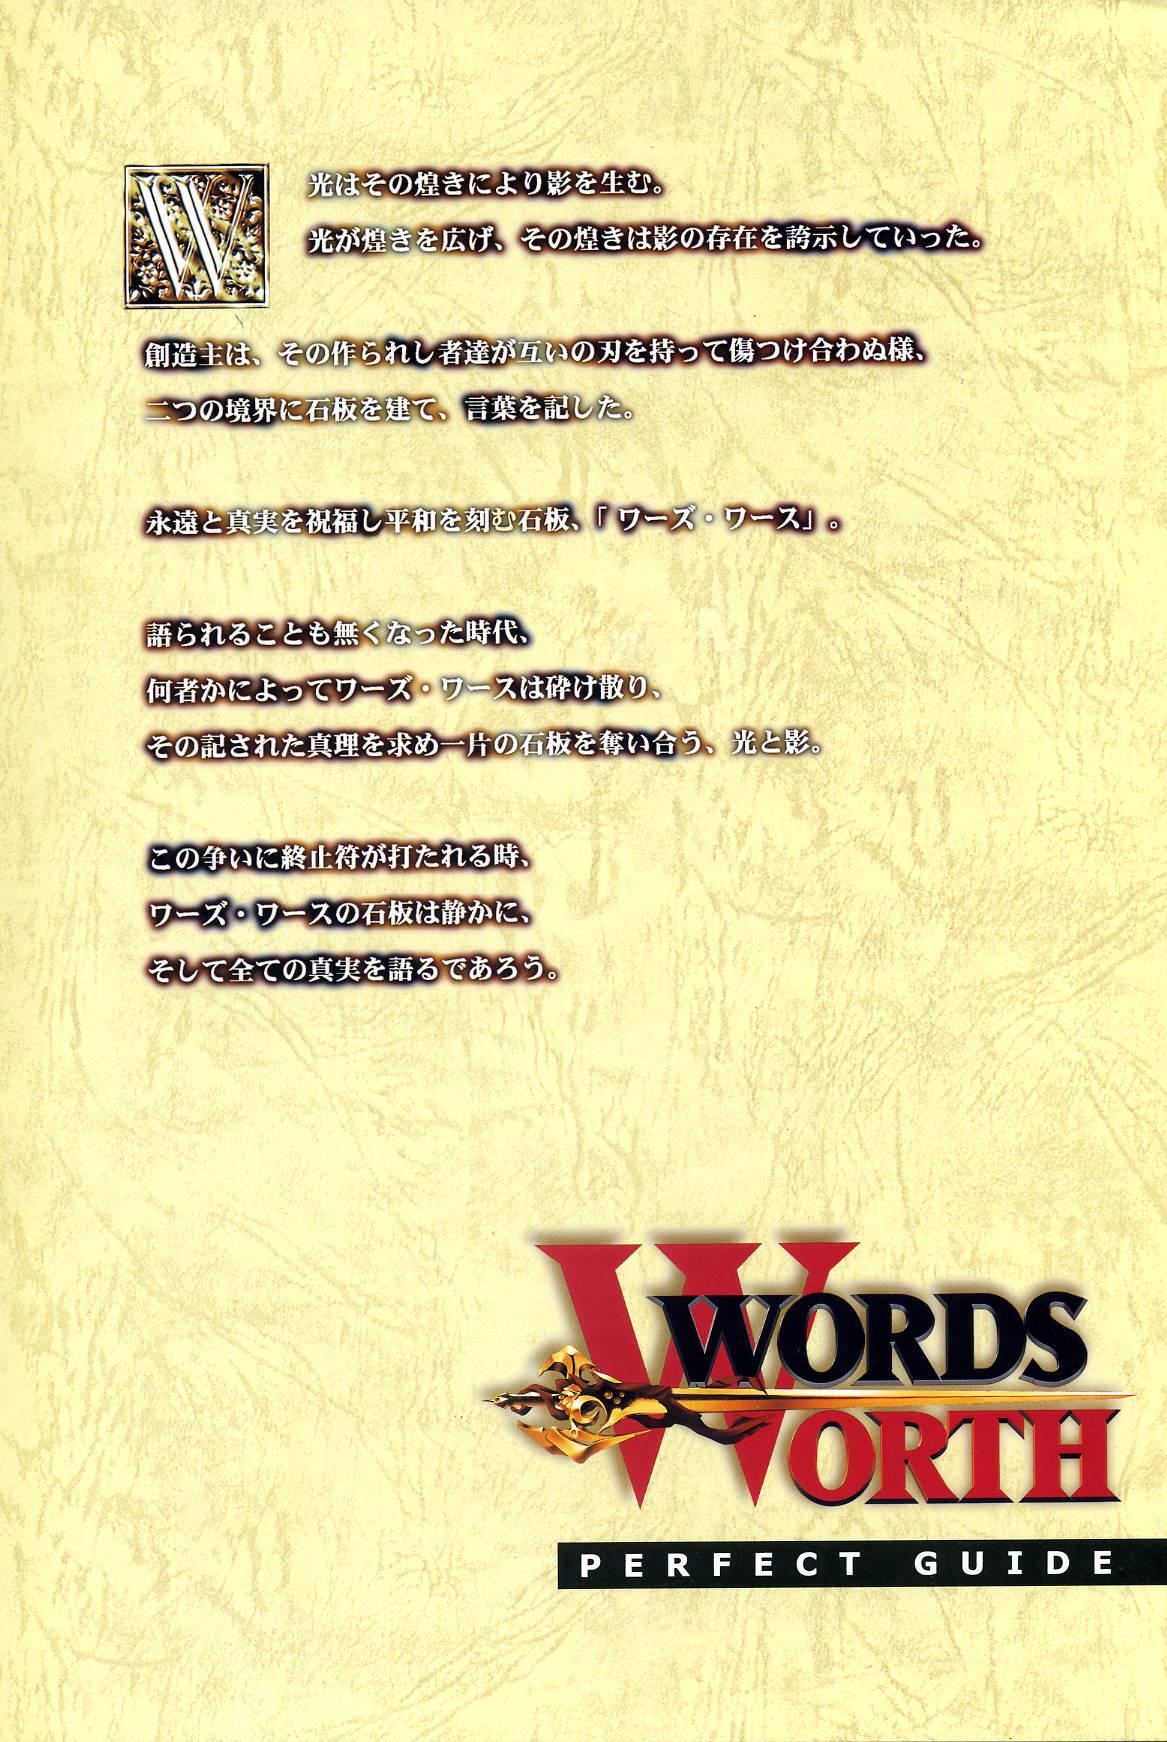 France WORDS WORTH 完全ガイド - Words worth English - Page 2